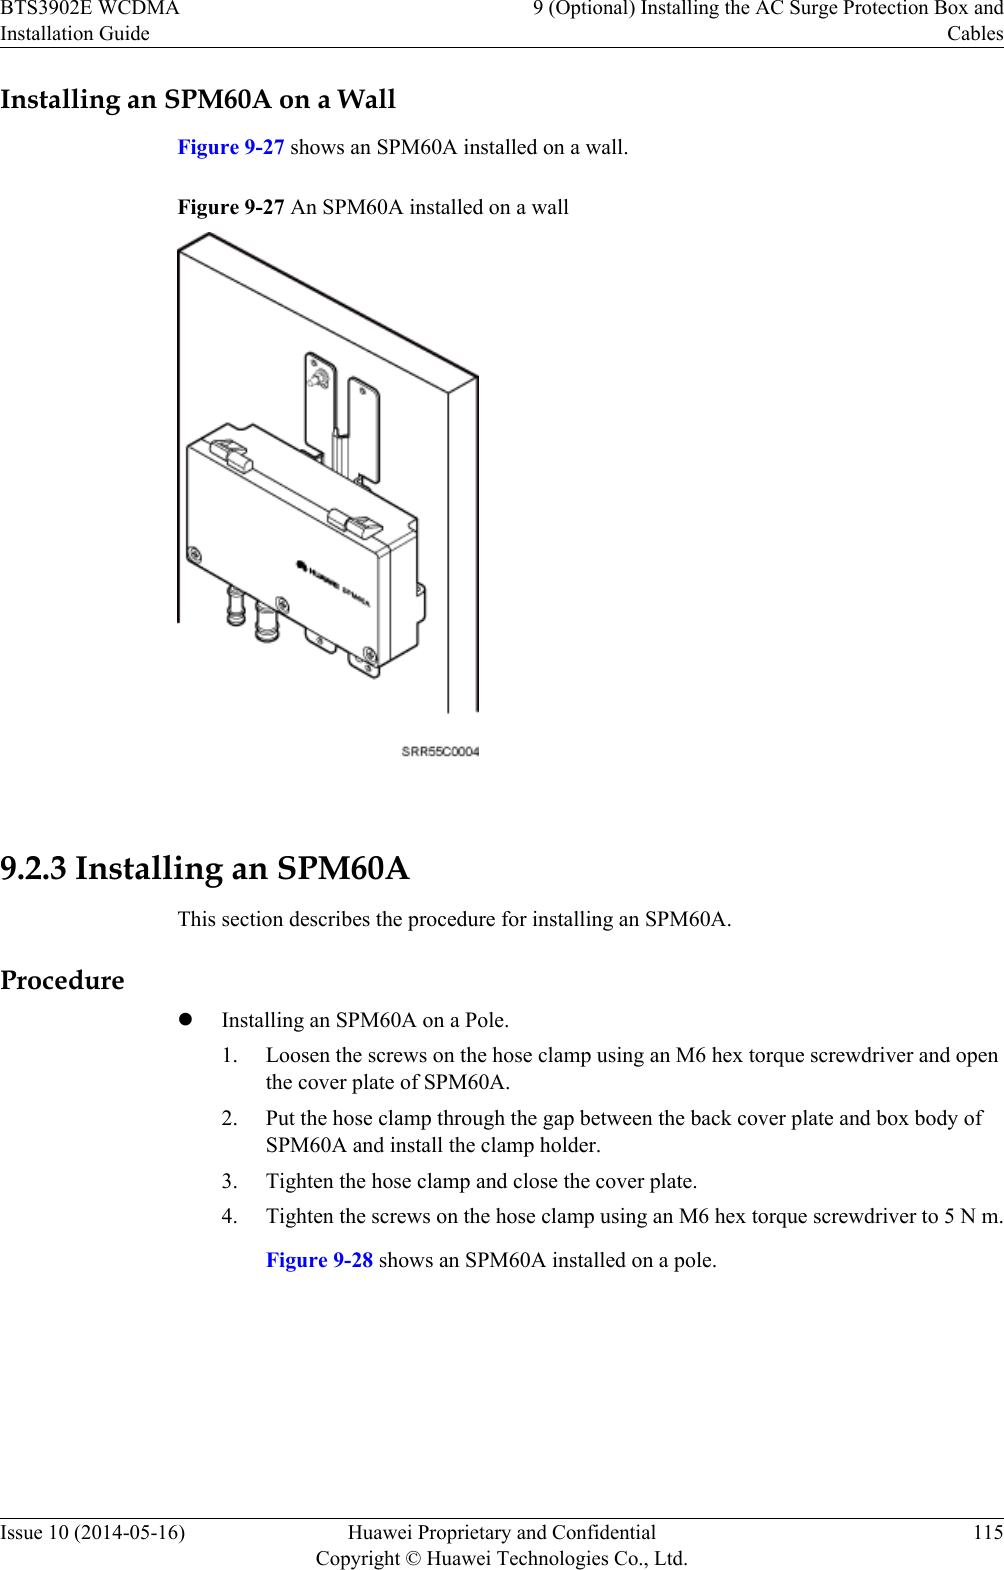 Installing an SPM60A on a WallFigure 9-27 shows an SPM60A installed on a wall.Figure 9-27 An SPM60A installed on a wall 9.2.3 Installing an SPM60AThis section describes the procedure for installing an SPM60A.ProcedurelInstalling an SPM60A on a Pole.1. Loosen the screws on the hose clamp using an M6 hex torque screwdriver and openthe cover plate of SPM60A.2. Put the hose clamp through the gap between the back cover plate and box body ofSPM60A and install the clamp holder.3. Tighten the hose clamp and close the cover plate.4. Tighten the screws on the hose clamp using an M6 hex torque screwdriver to 5 N m.Figure 9-28 shows an SPM60A installed on a pole.BTS3902E WCDMAInstallation Guide9 (Optional) Installing the AC Surge Protection Box andCablesIssue 10 (2014-05-16) Huawei Proprietary and ConfidentialCopyright © Huawei Technologies Co., Ltd.115